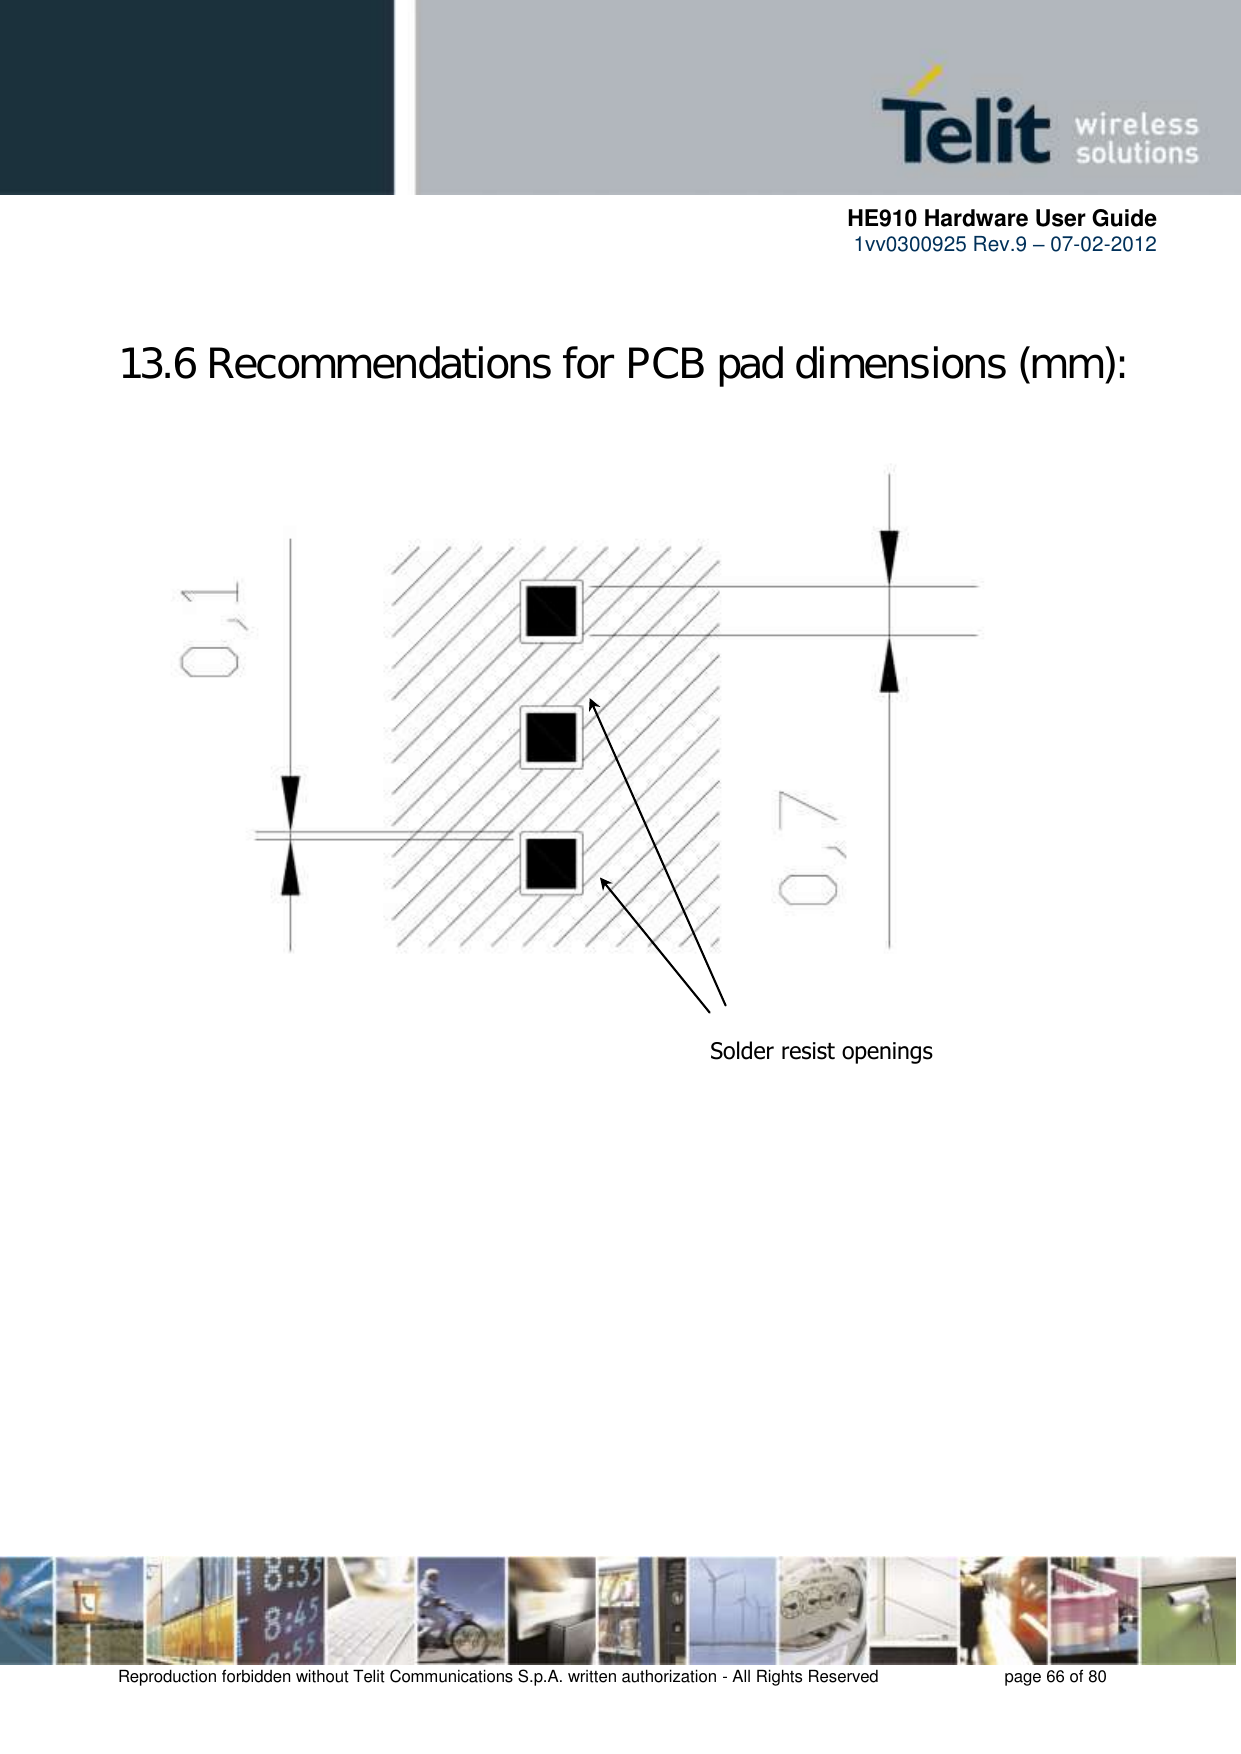      HE910 Hardware User Guide 1vv0300925 Rev.9 – 07-02-2012    Reproduction forbidden without Telit Communications S.p.A. written authorization - All Rights Reserved    page 66 of 80   13.6 Recommendations for PCB pad dimensions (mm):                         Solder resist openings 